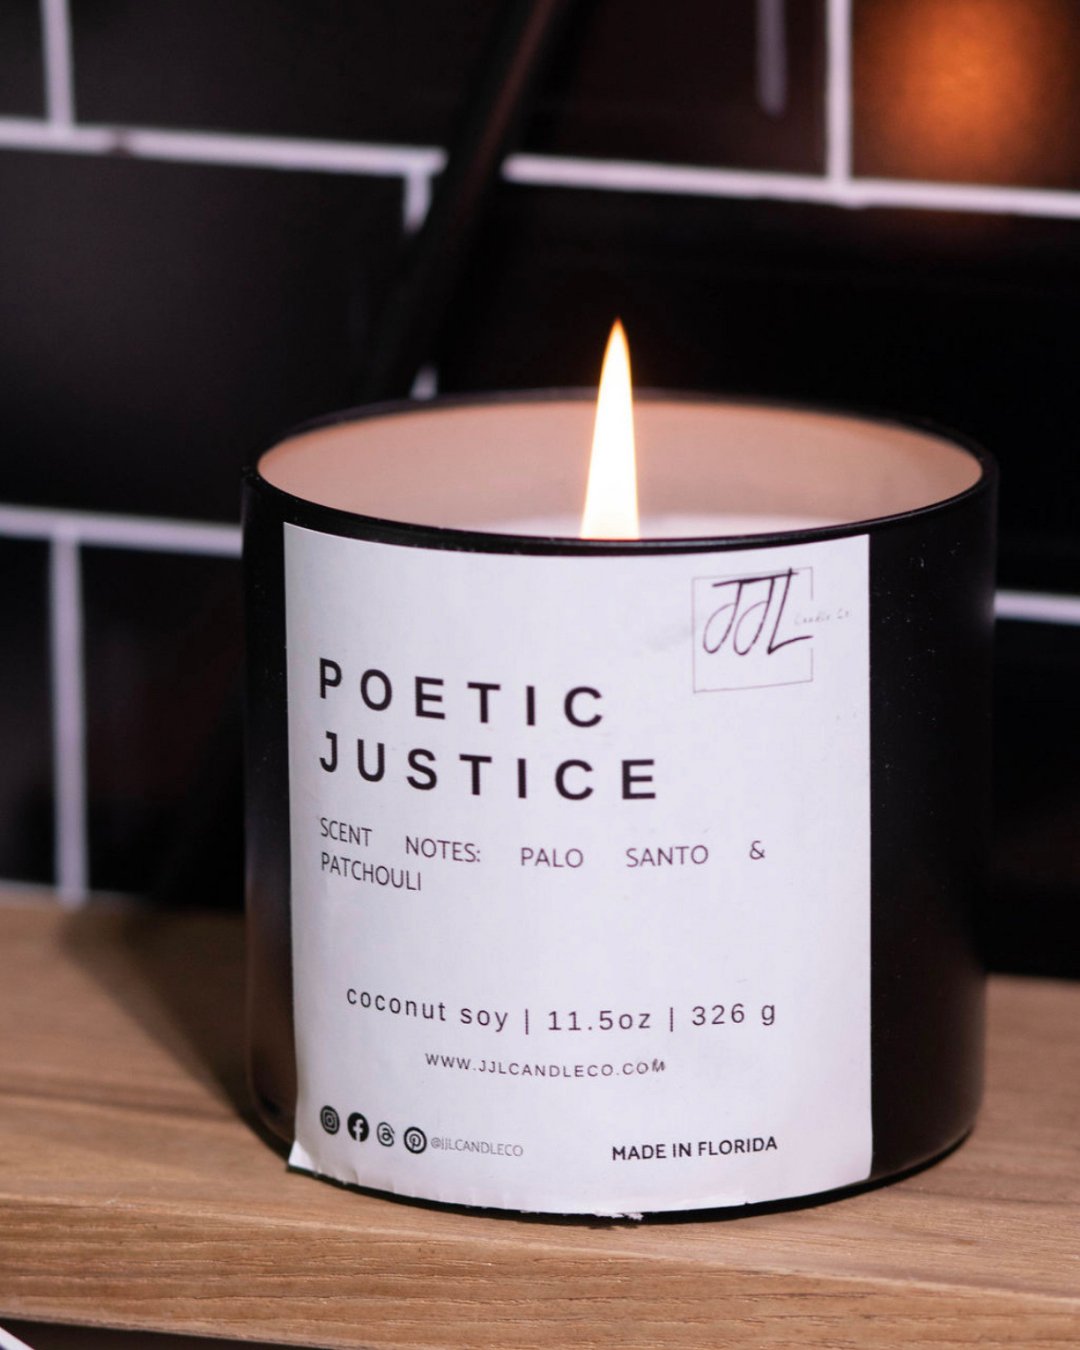 Poetic Justice - J.J.L. Candle Co.